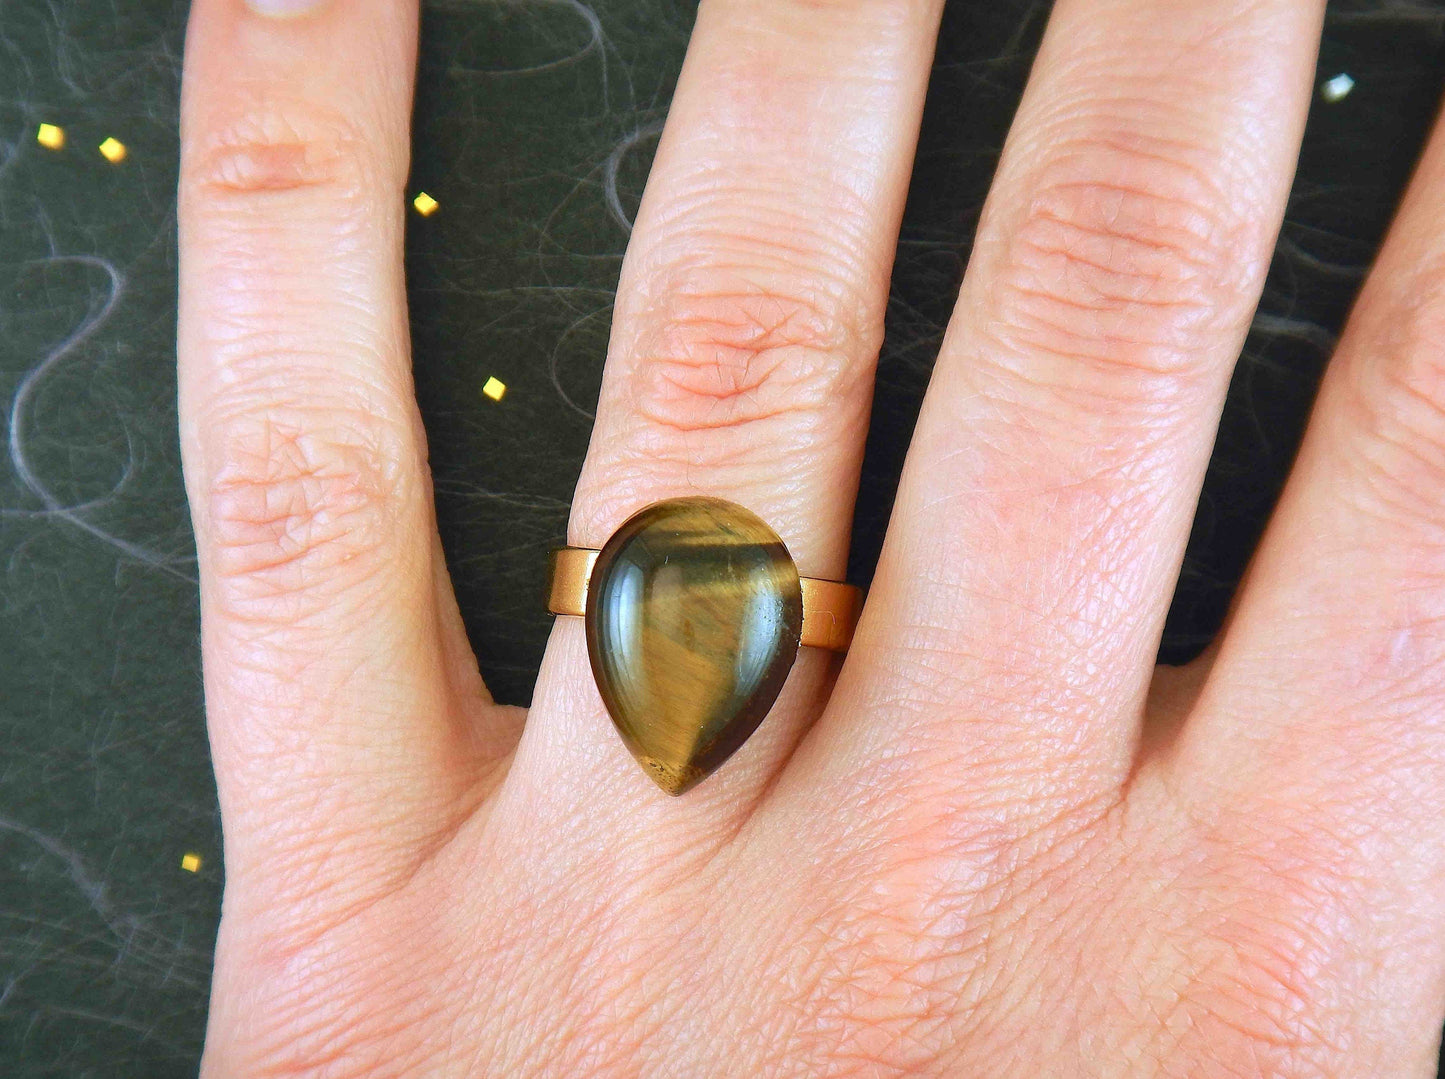 Finger ring with drop-shaped golden tiger eye stone cabochon, gold-toned hypoallergenic stainless steel adjustable base (US 7-8)